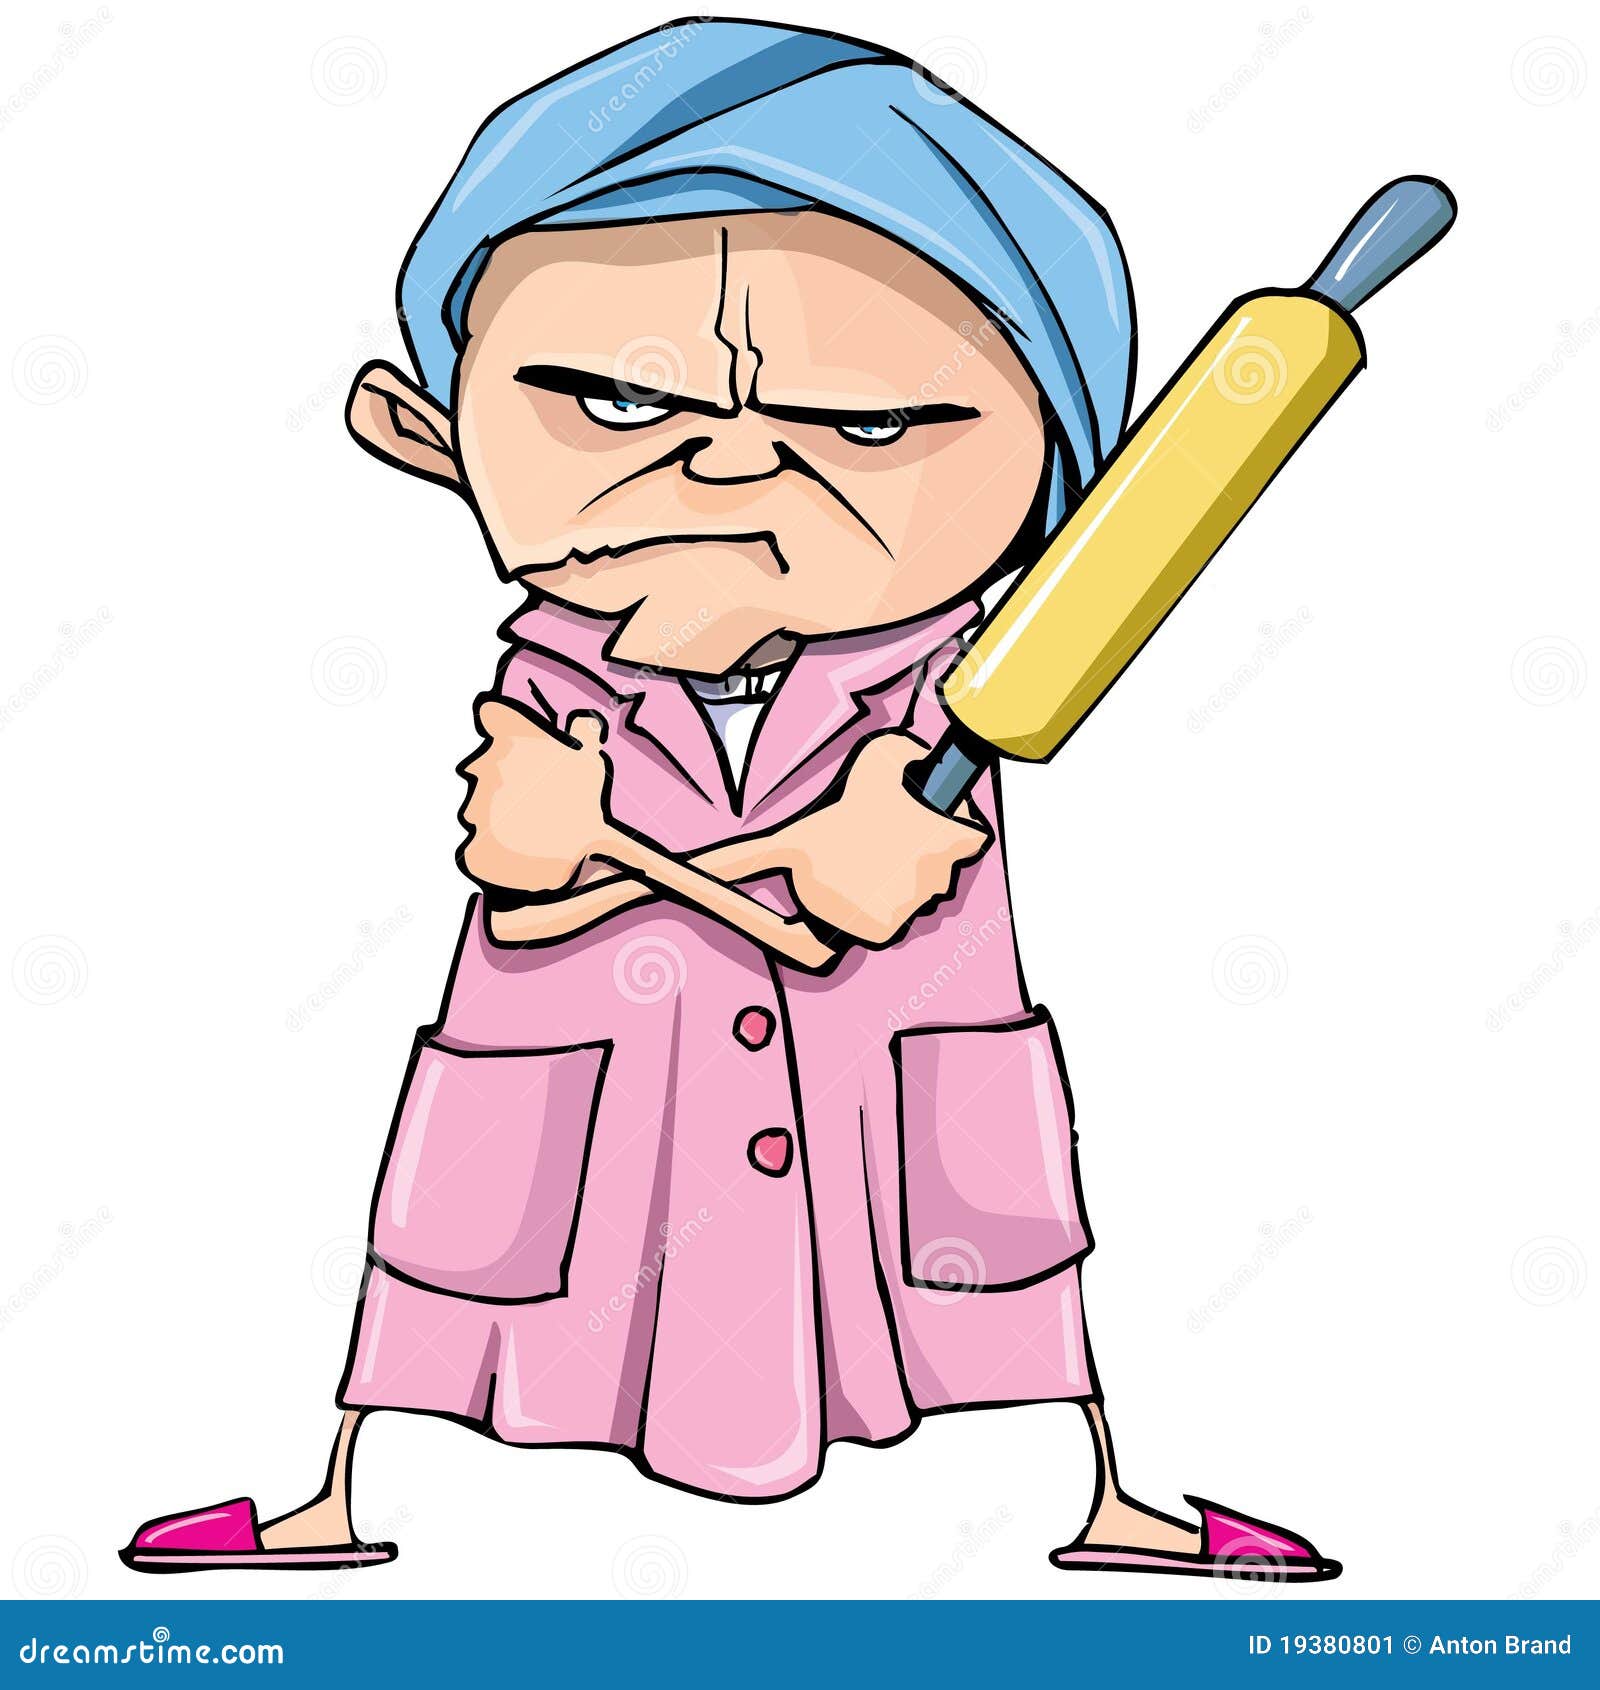 Cartoon of mean old woman stock vector. Illustration of grey - 19380801